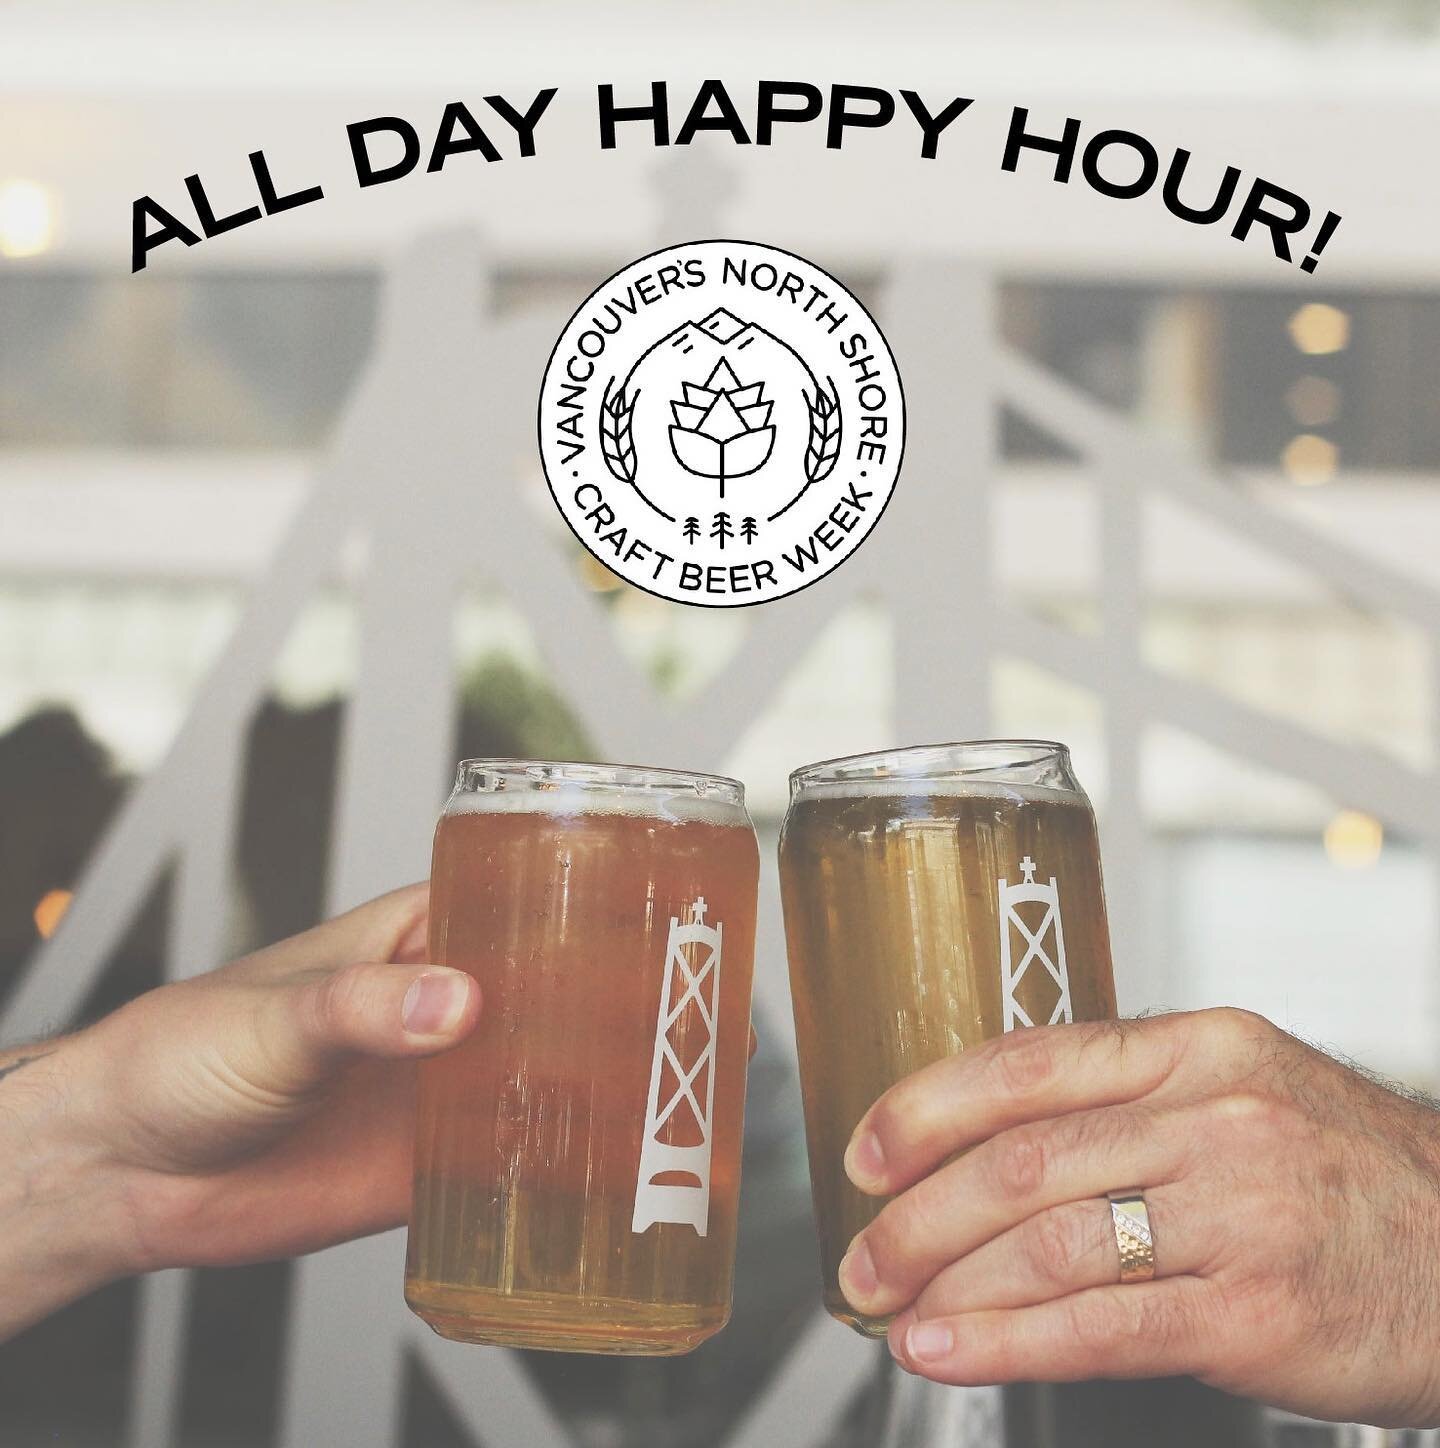 To wrap up the festivities of VNSCBW, we have all day happy hour TODAY! That&rsquo;s right- food specials and $5 pints all day. We&rsquo;ll be stamping passports and serving up good food and beer open till close.
#explorenorthshore #VNSbeerpassport